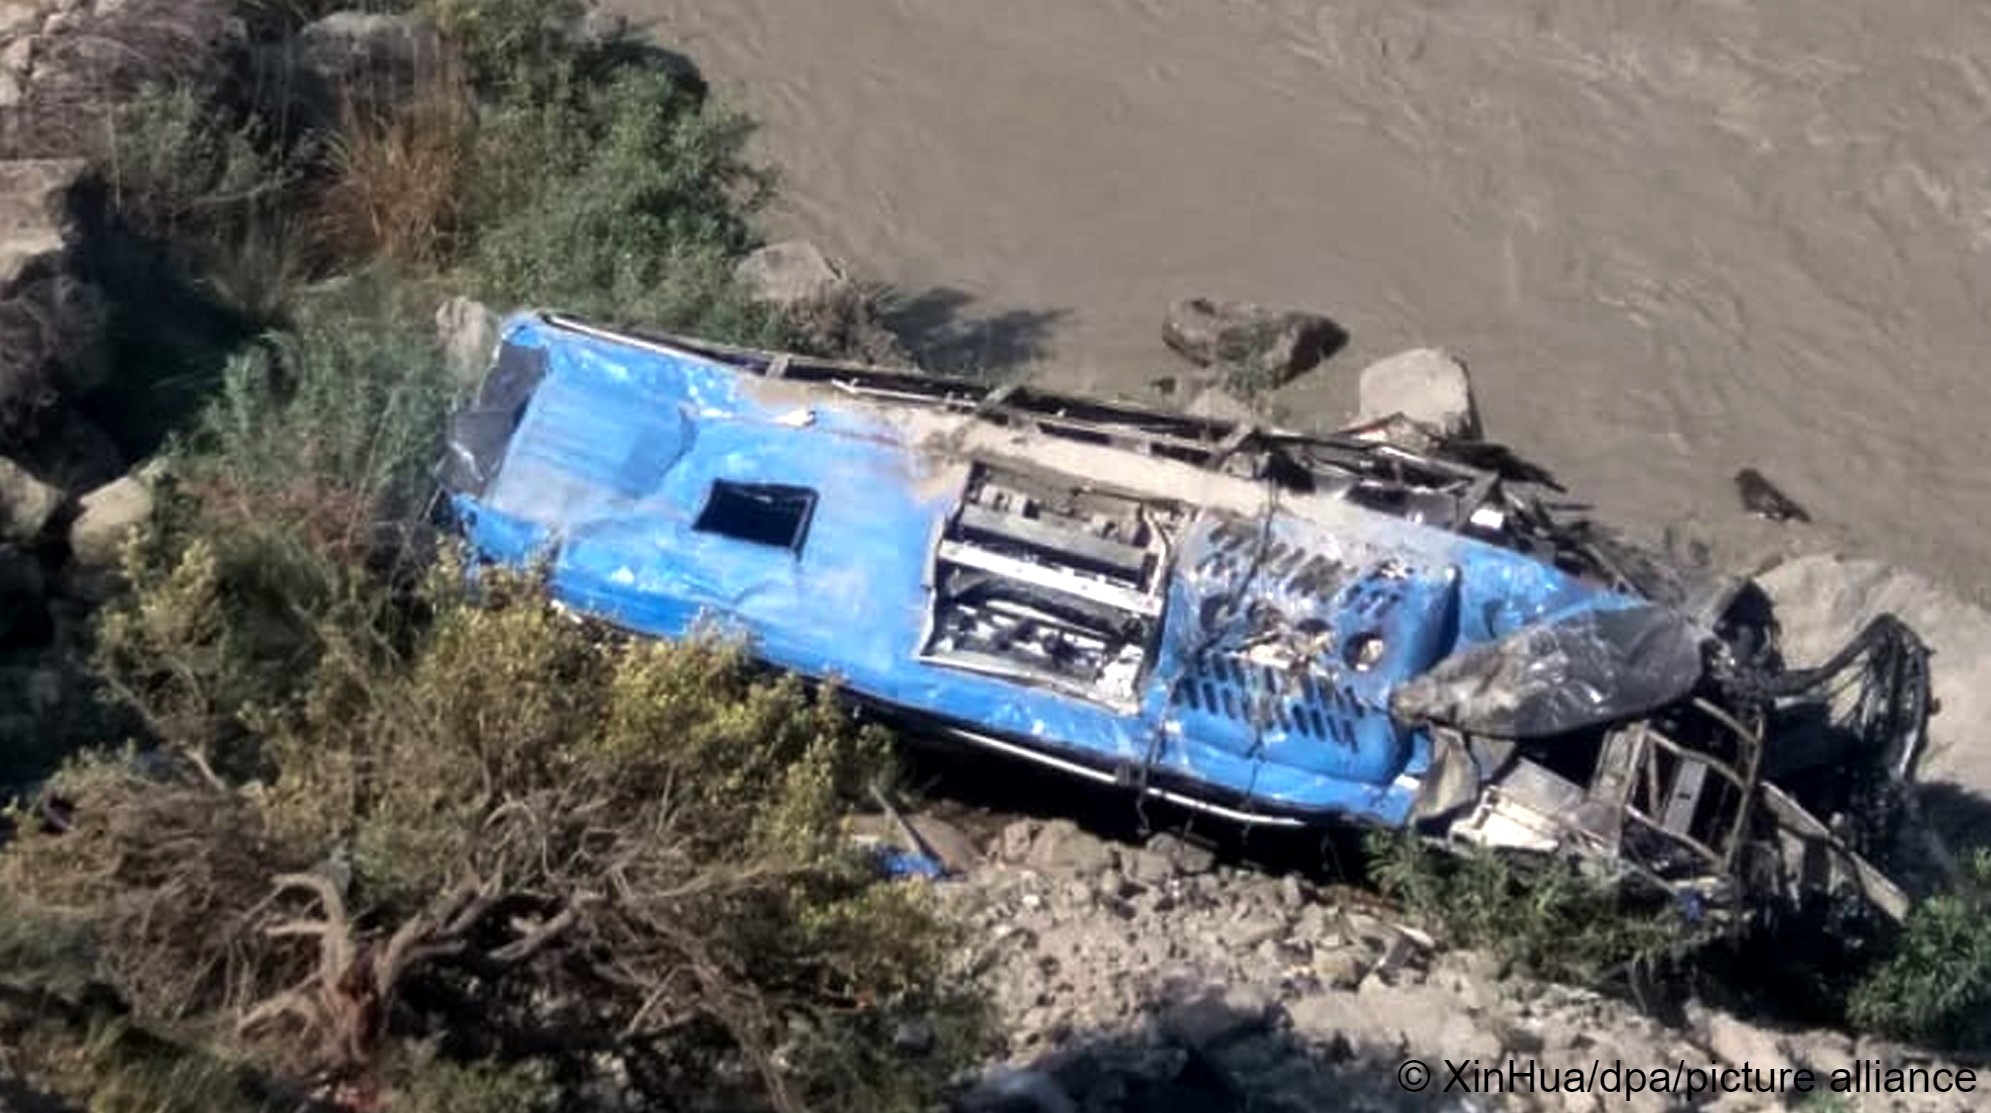 The wreckage of a bus lies on rubble not far from a river. Thirteen people were killed in an explosion on a bus in northern Pakistan on 14 July 2021 (photo: dpa Bildfunk) 